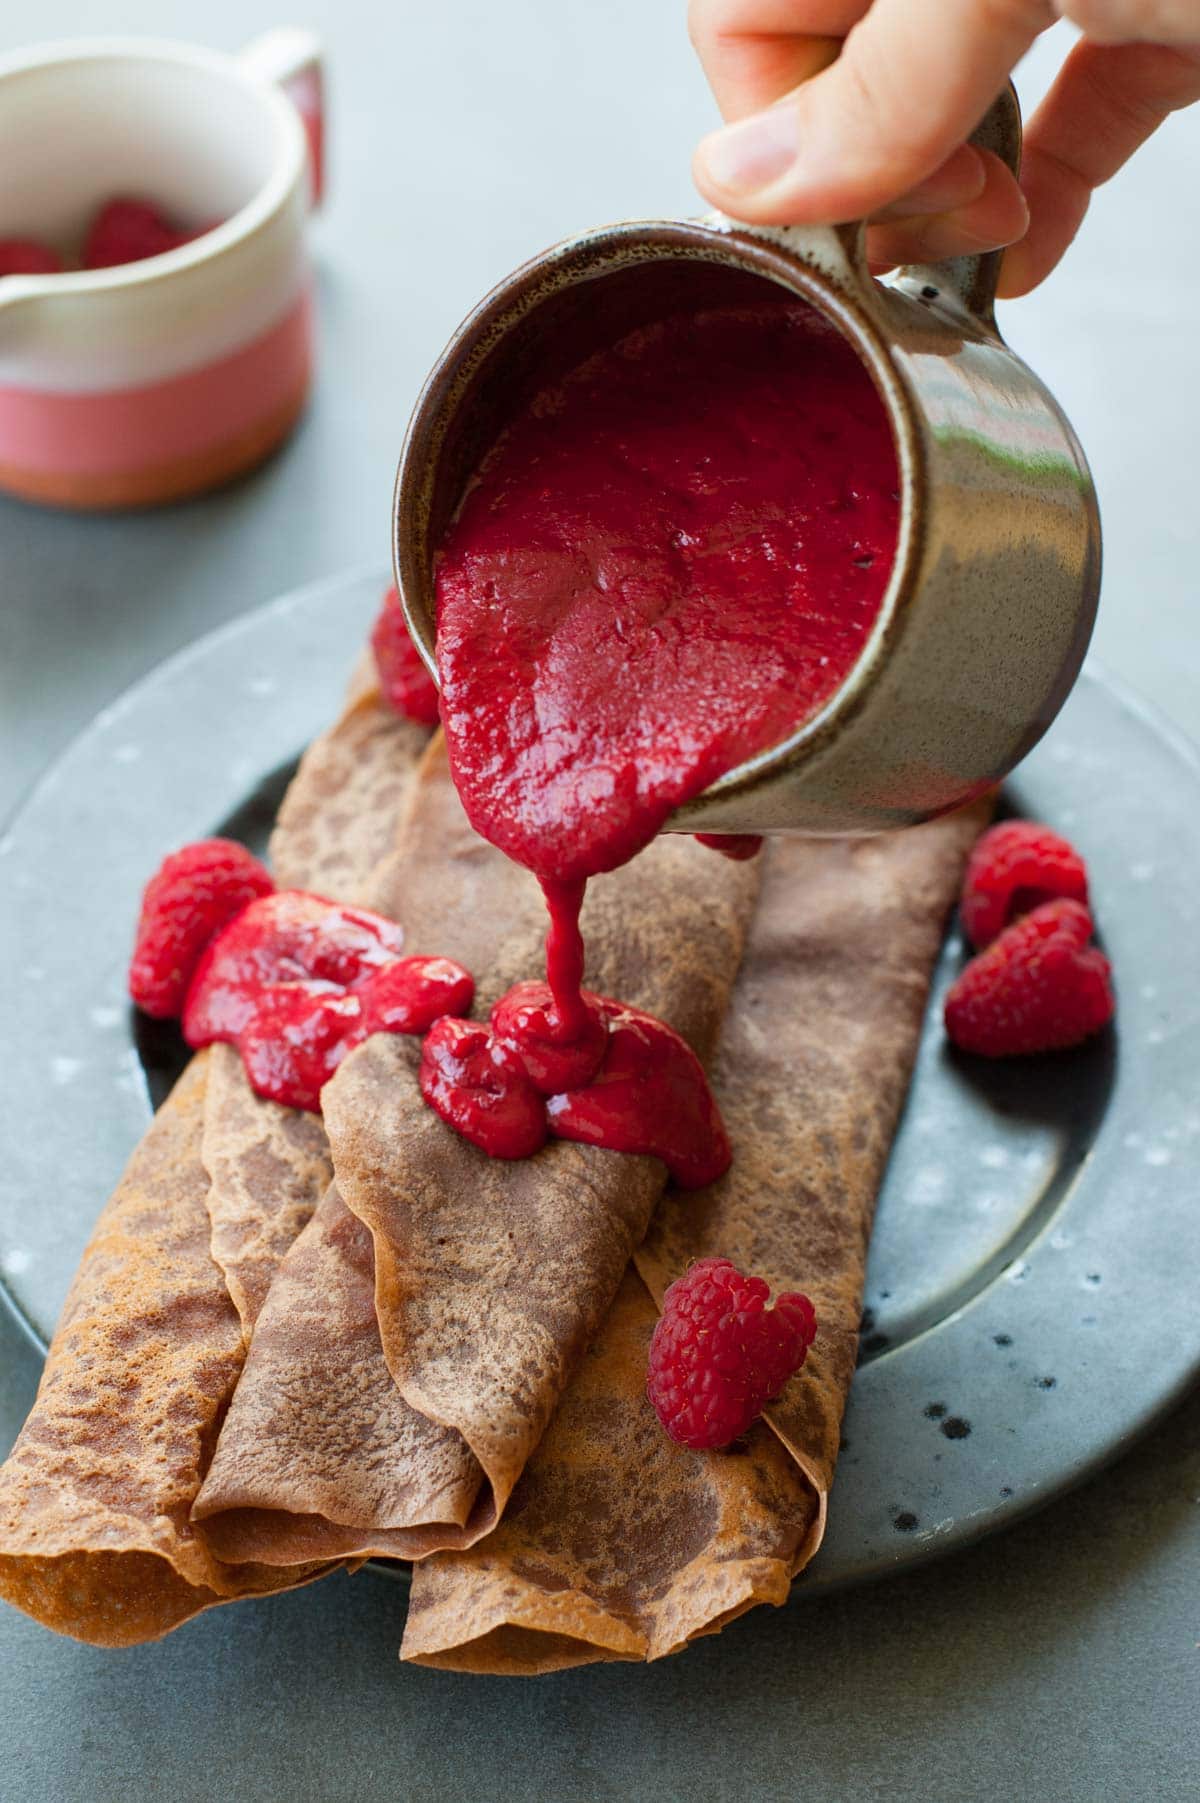 Chocolate crepes on a black plate are being poured with raspberry sauce.